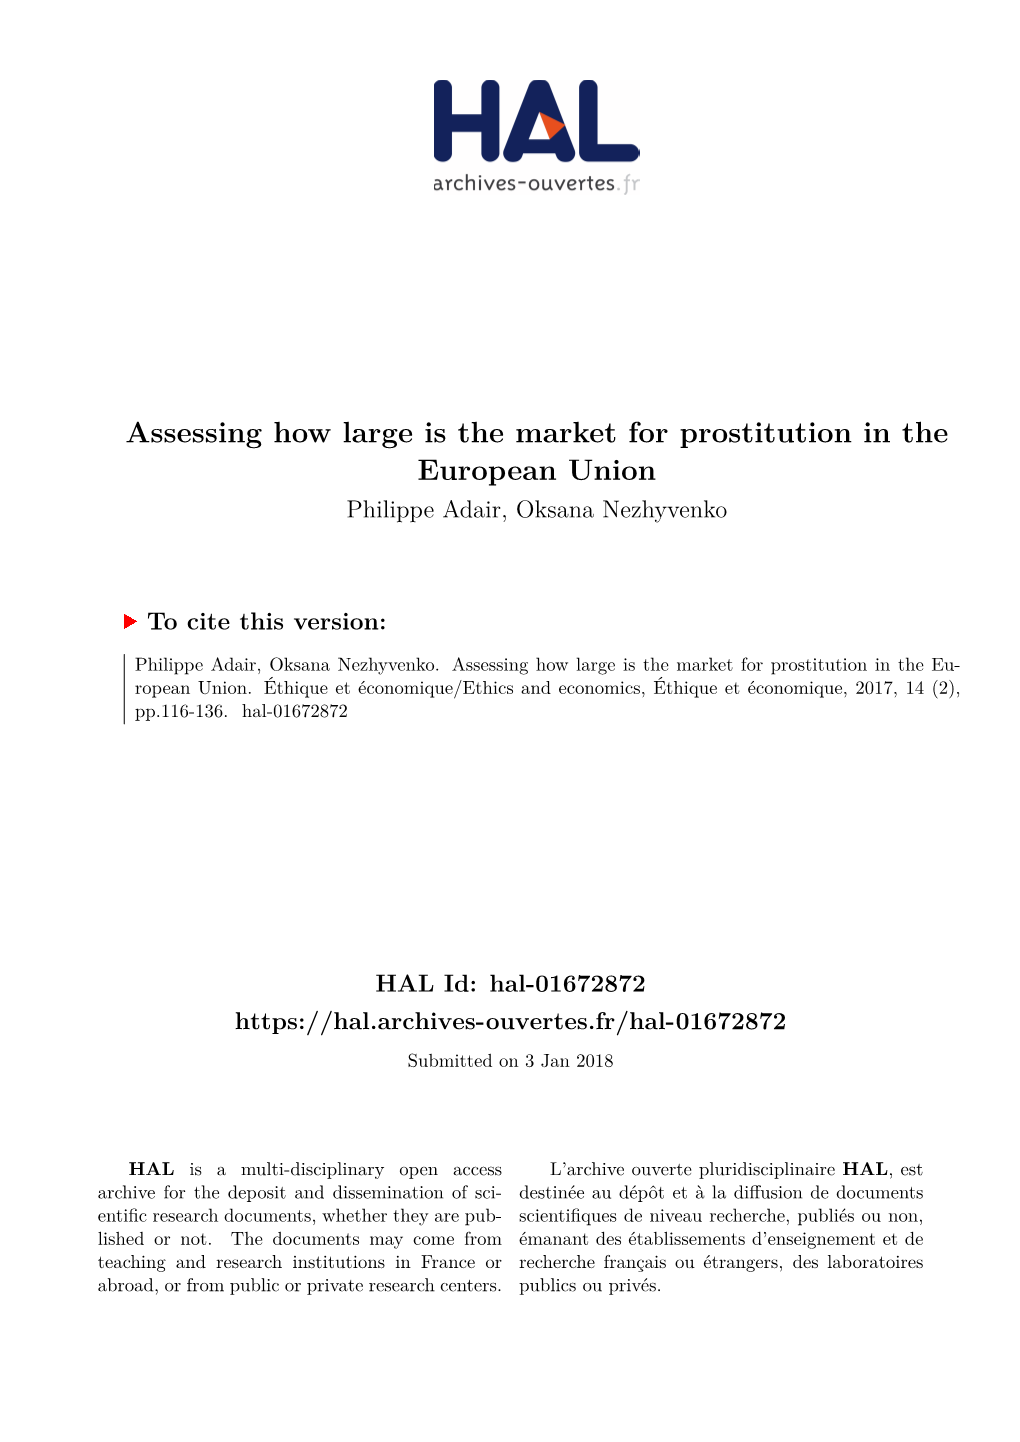 Assessing How Large Is the Market for Prostitution in the European Union Philippe Adair, Oksana Nezhyvenko